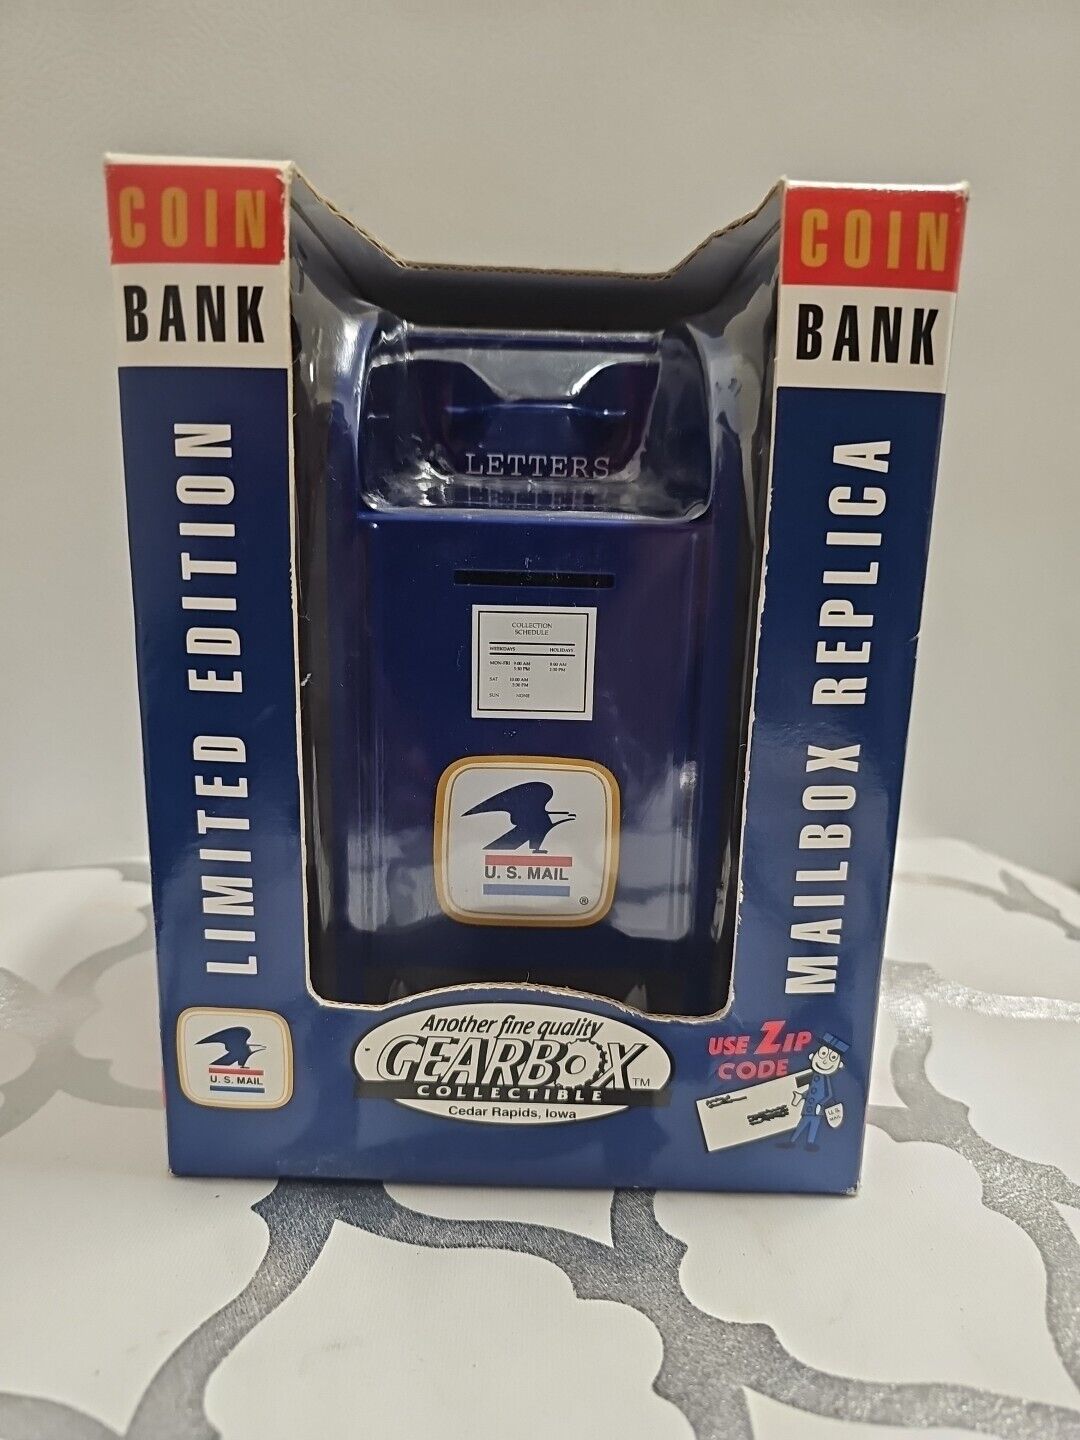 Coin Bank 1997 Gearbox USPS Post Office Blue Mailbox Brand New in Box